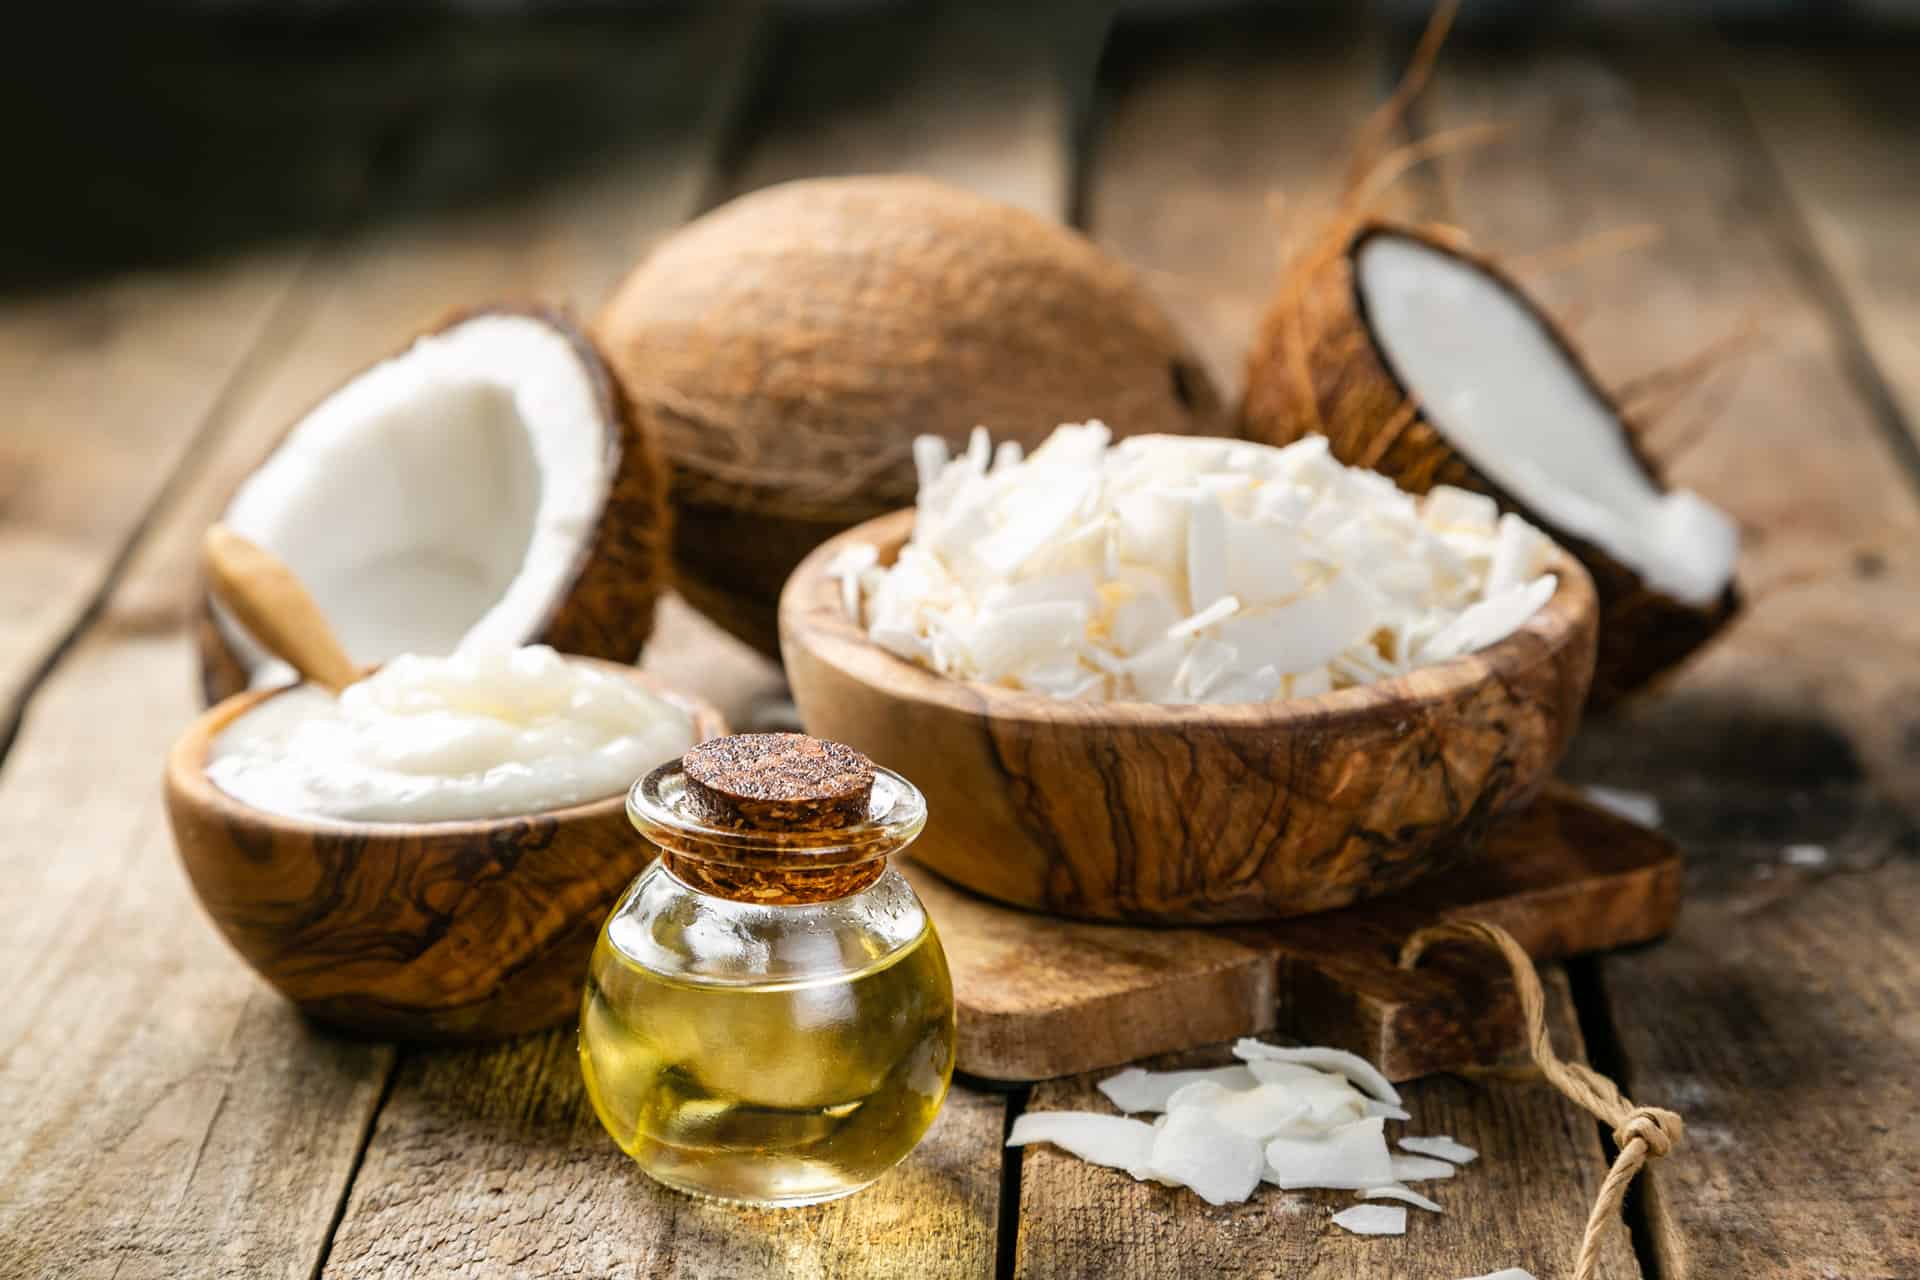 mct-oil-coconut-oil-concept-coconuts-butter-and-oil-on-wood-background